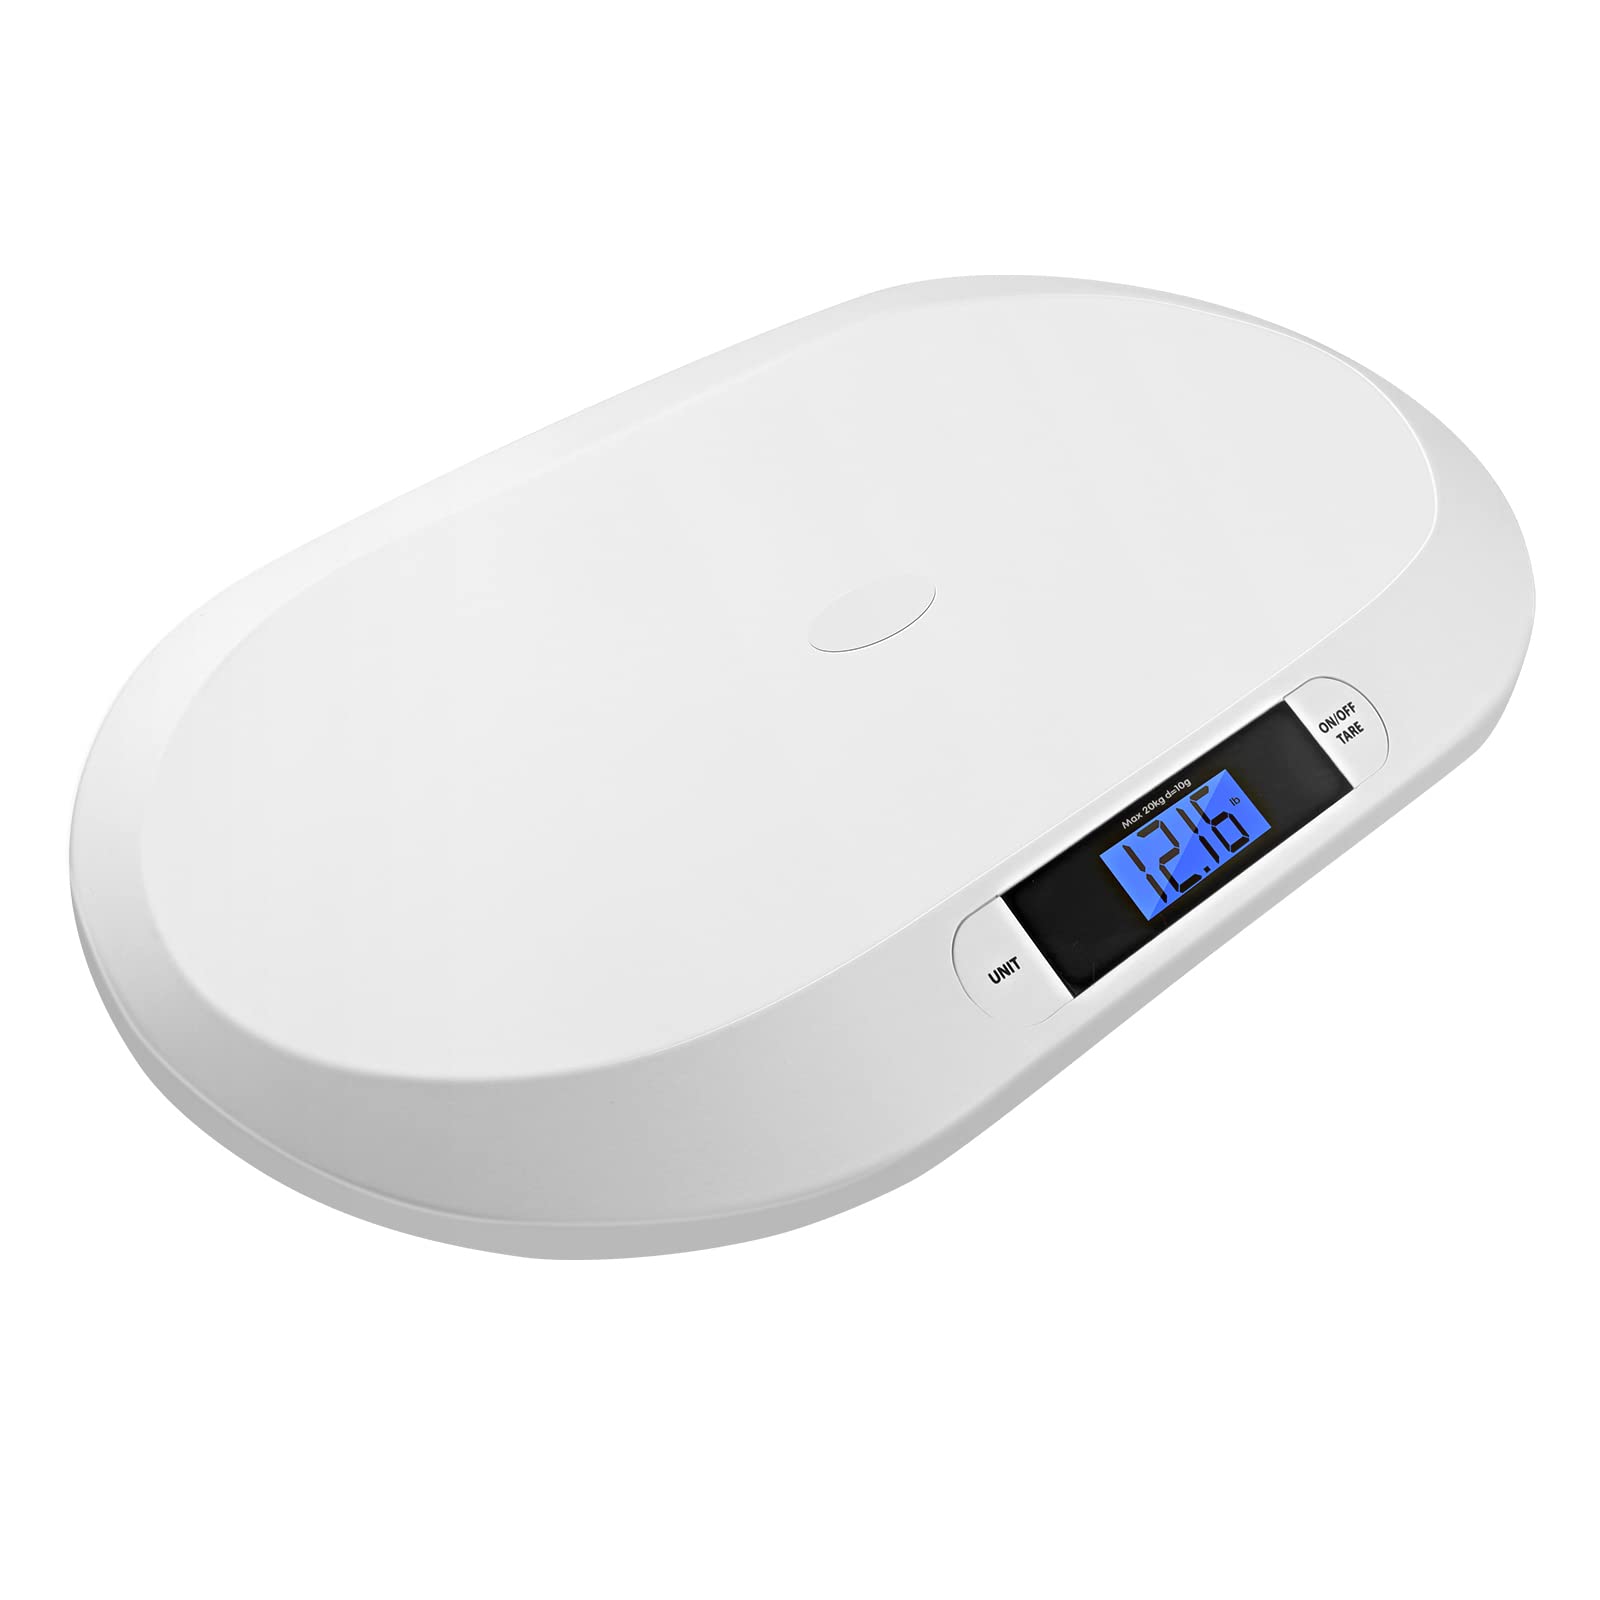 Baby Scale, Digital in Lbs and Ounces for Baby, Pet Weight Infant Scale for  Weighing Pet Scale for Cats and Dogs Scale Small Animal Scale Pet Weight